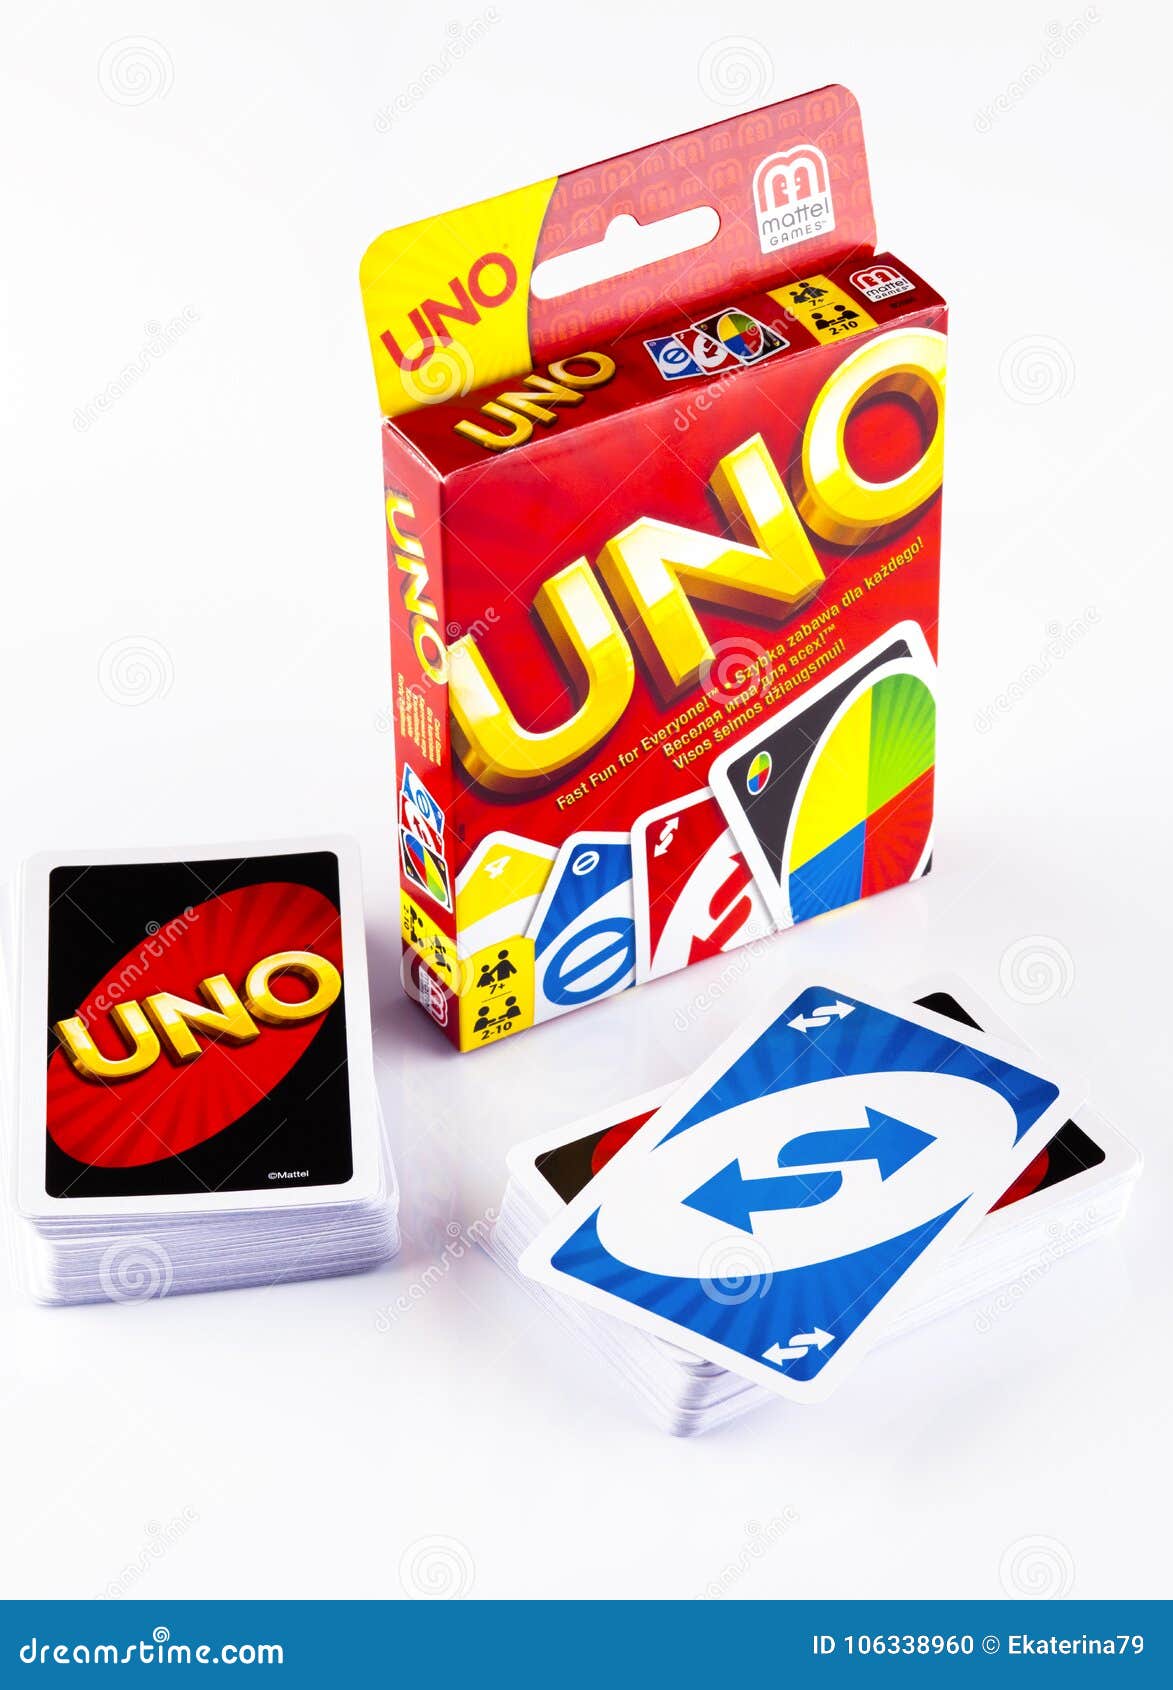 Uno Card Box, Two Deck Playing Card Box